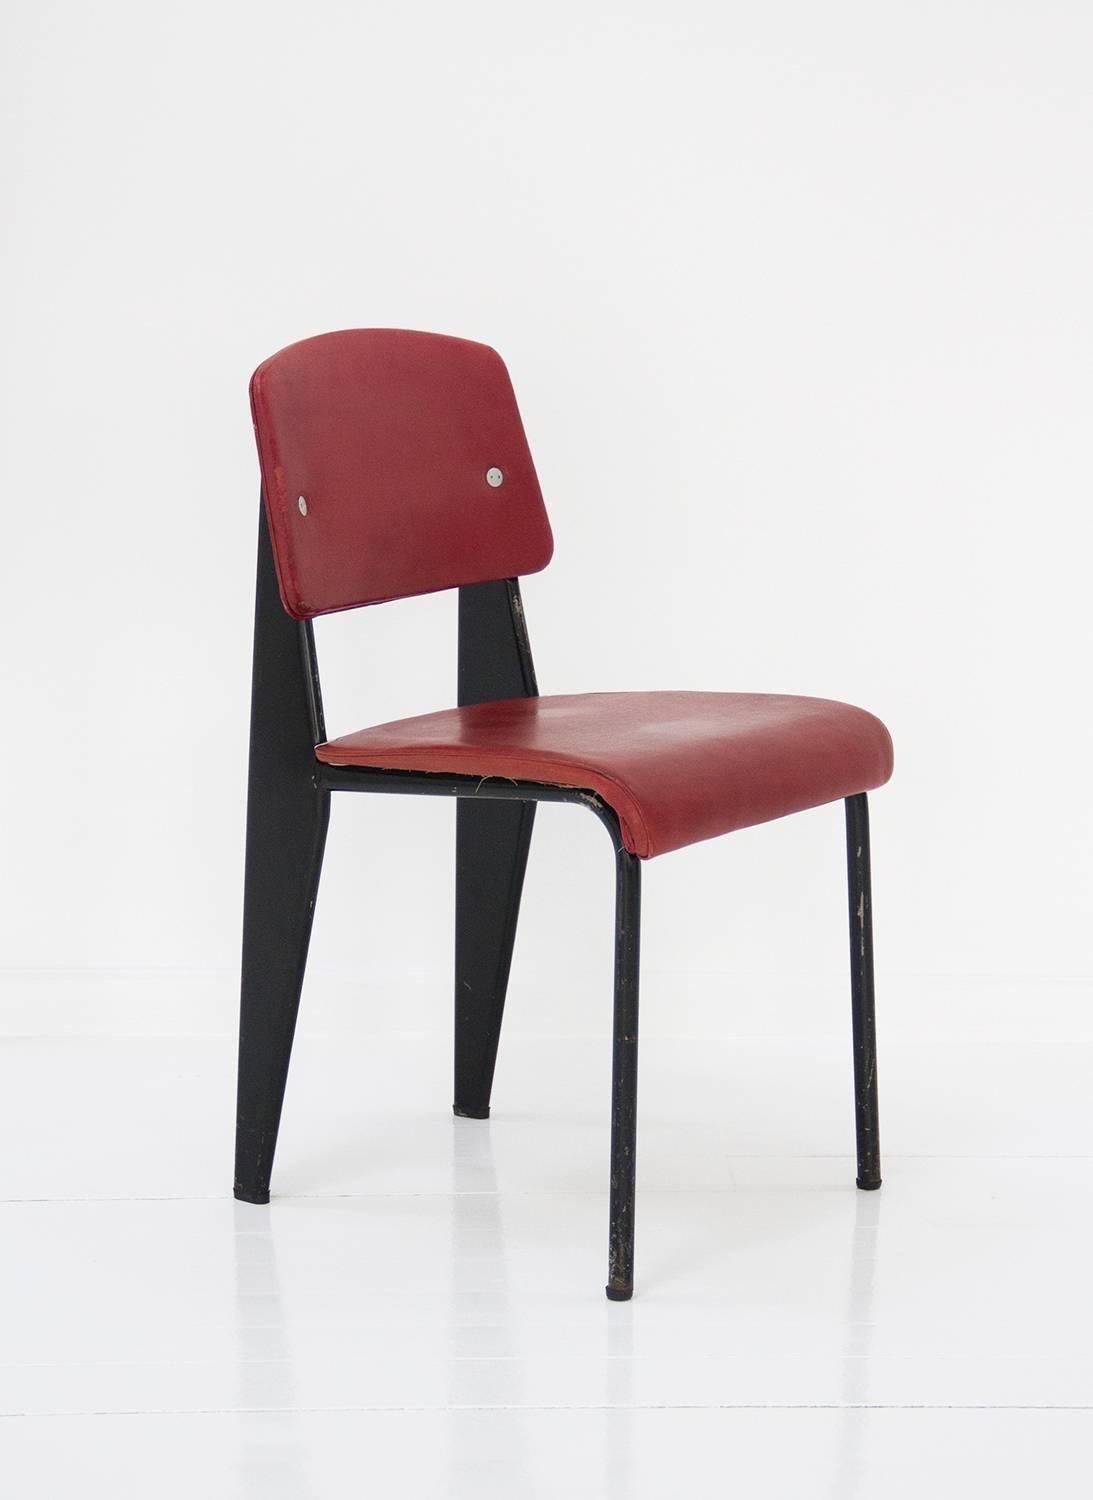 Mid-20th Century Standard Chair Designed by Jean Prouve, circa 1950, France